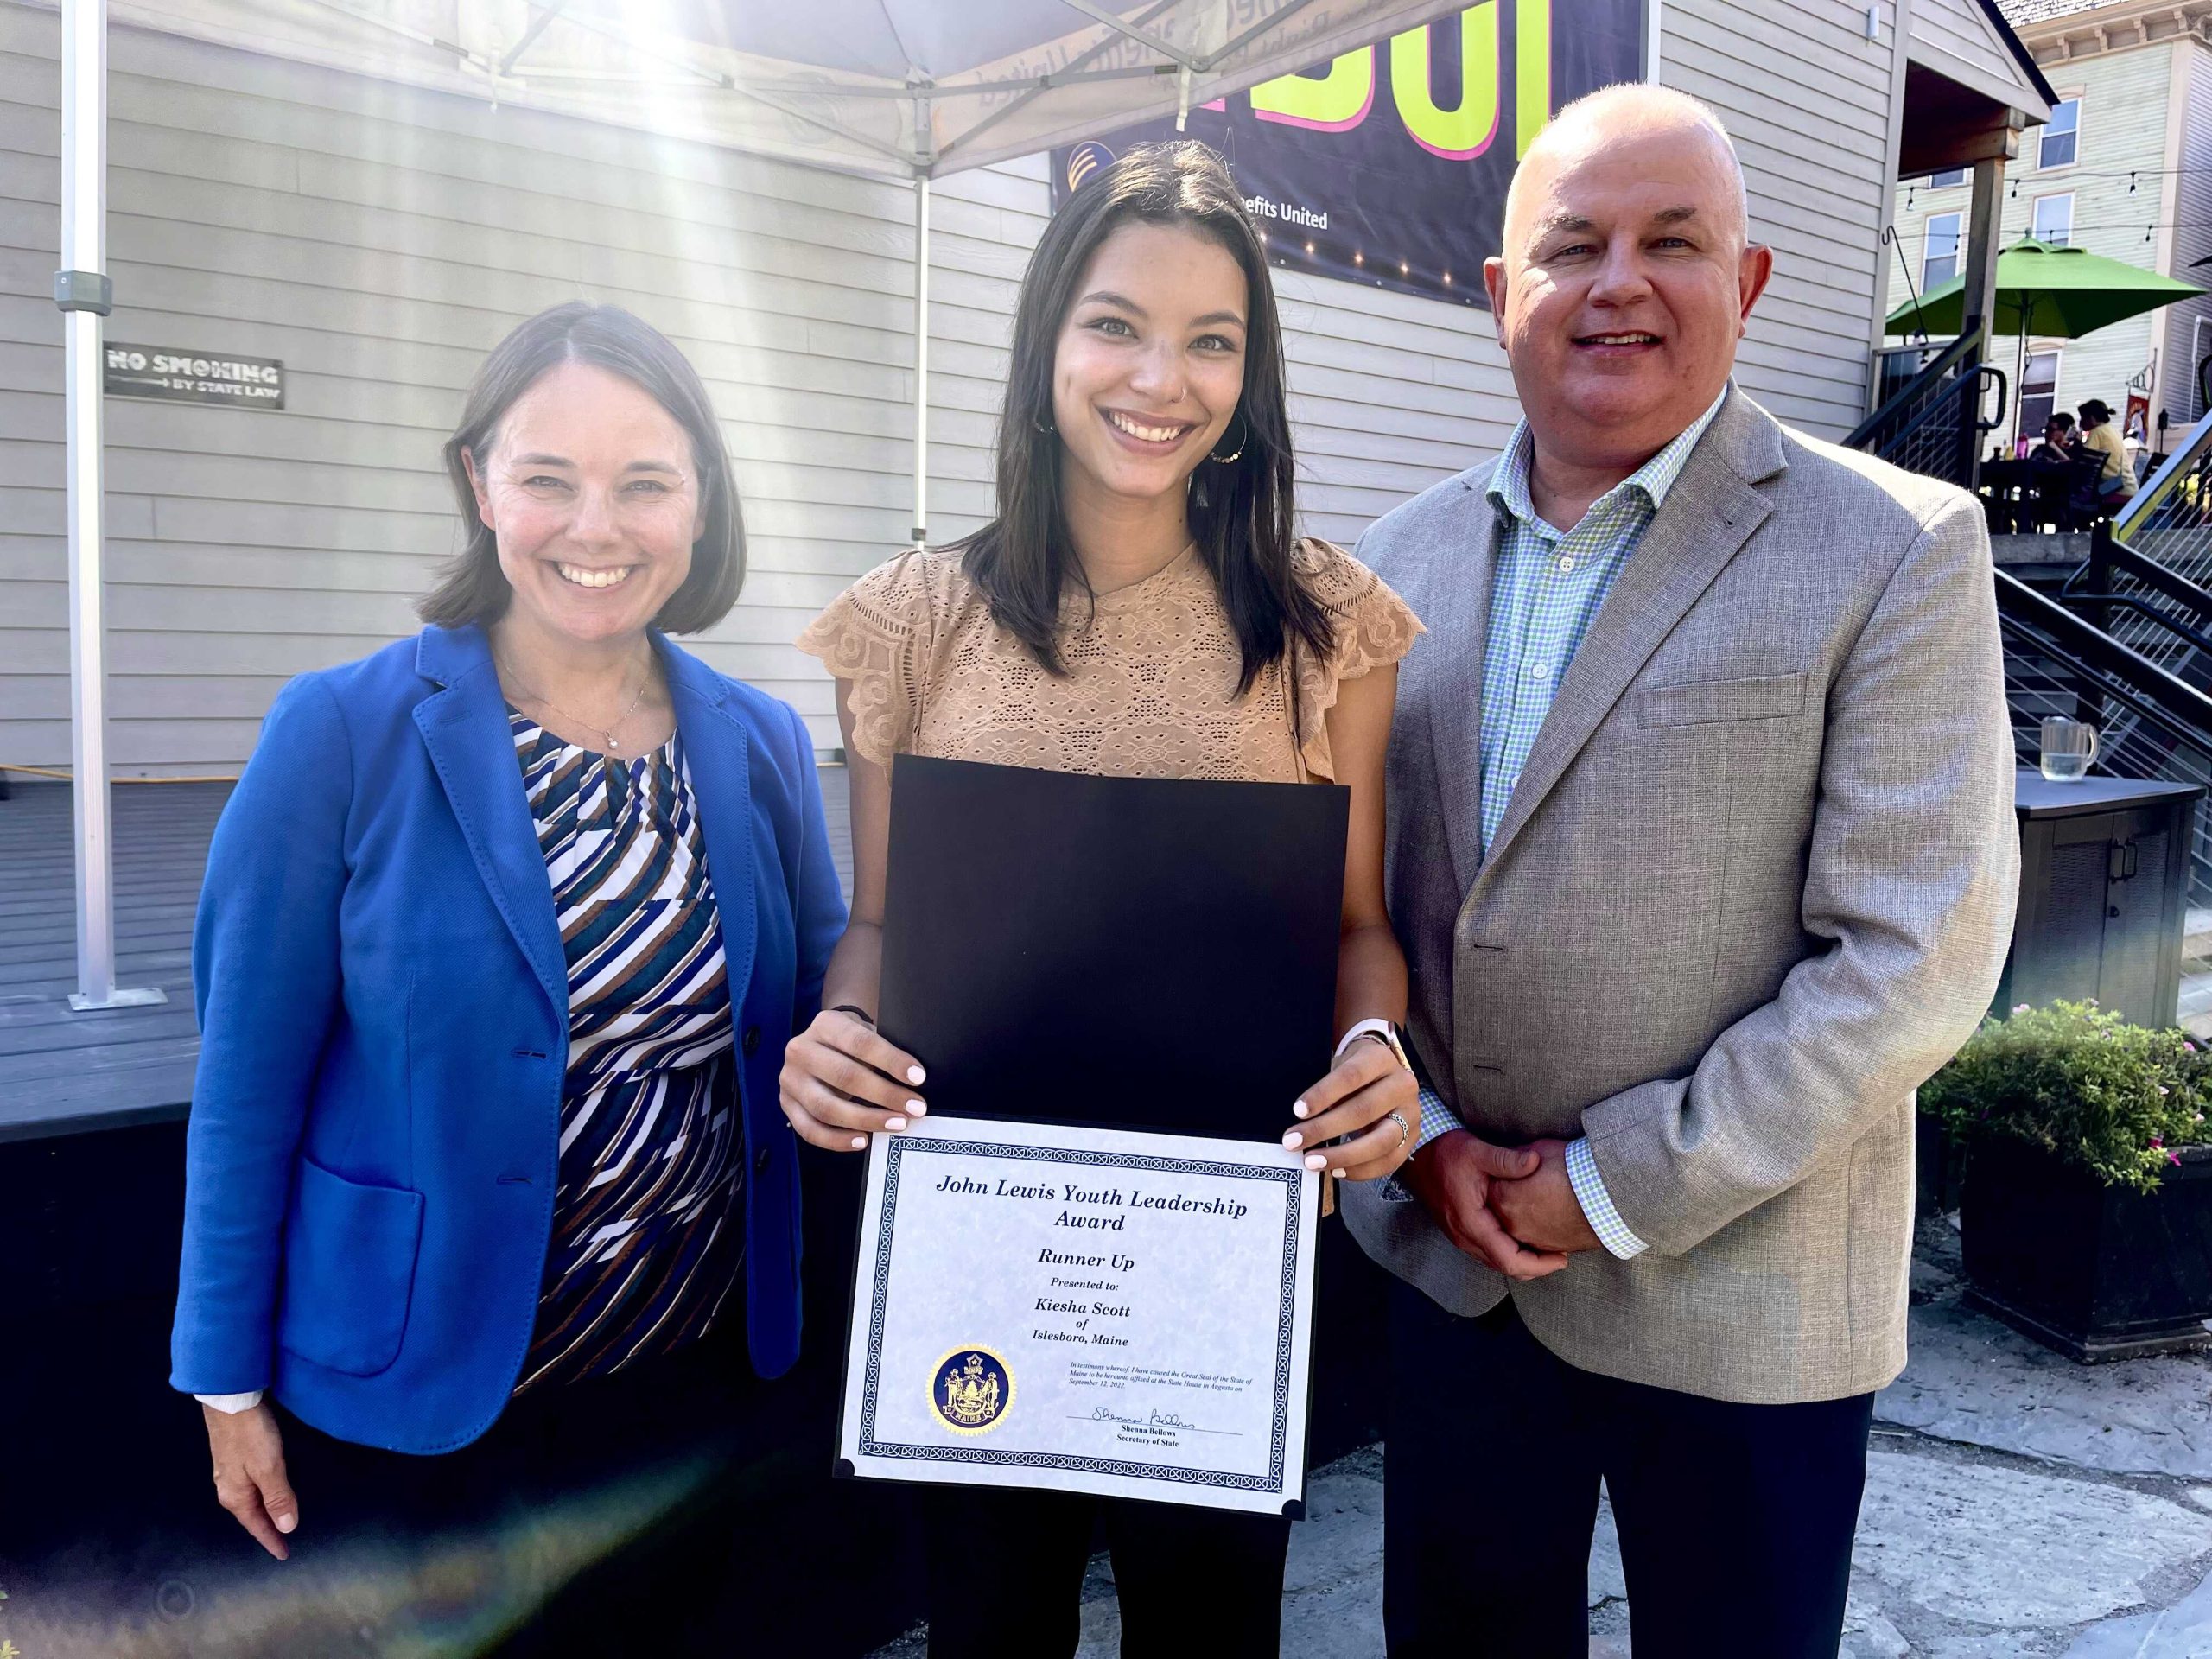 Maine Senator Shenna Bellows, UMaine Machias student Kiesha Scott and JMG CEO Craig Larrabee at the luncheon. They are standing outside in front of a building, Kiesha is holdnig her certificate.